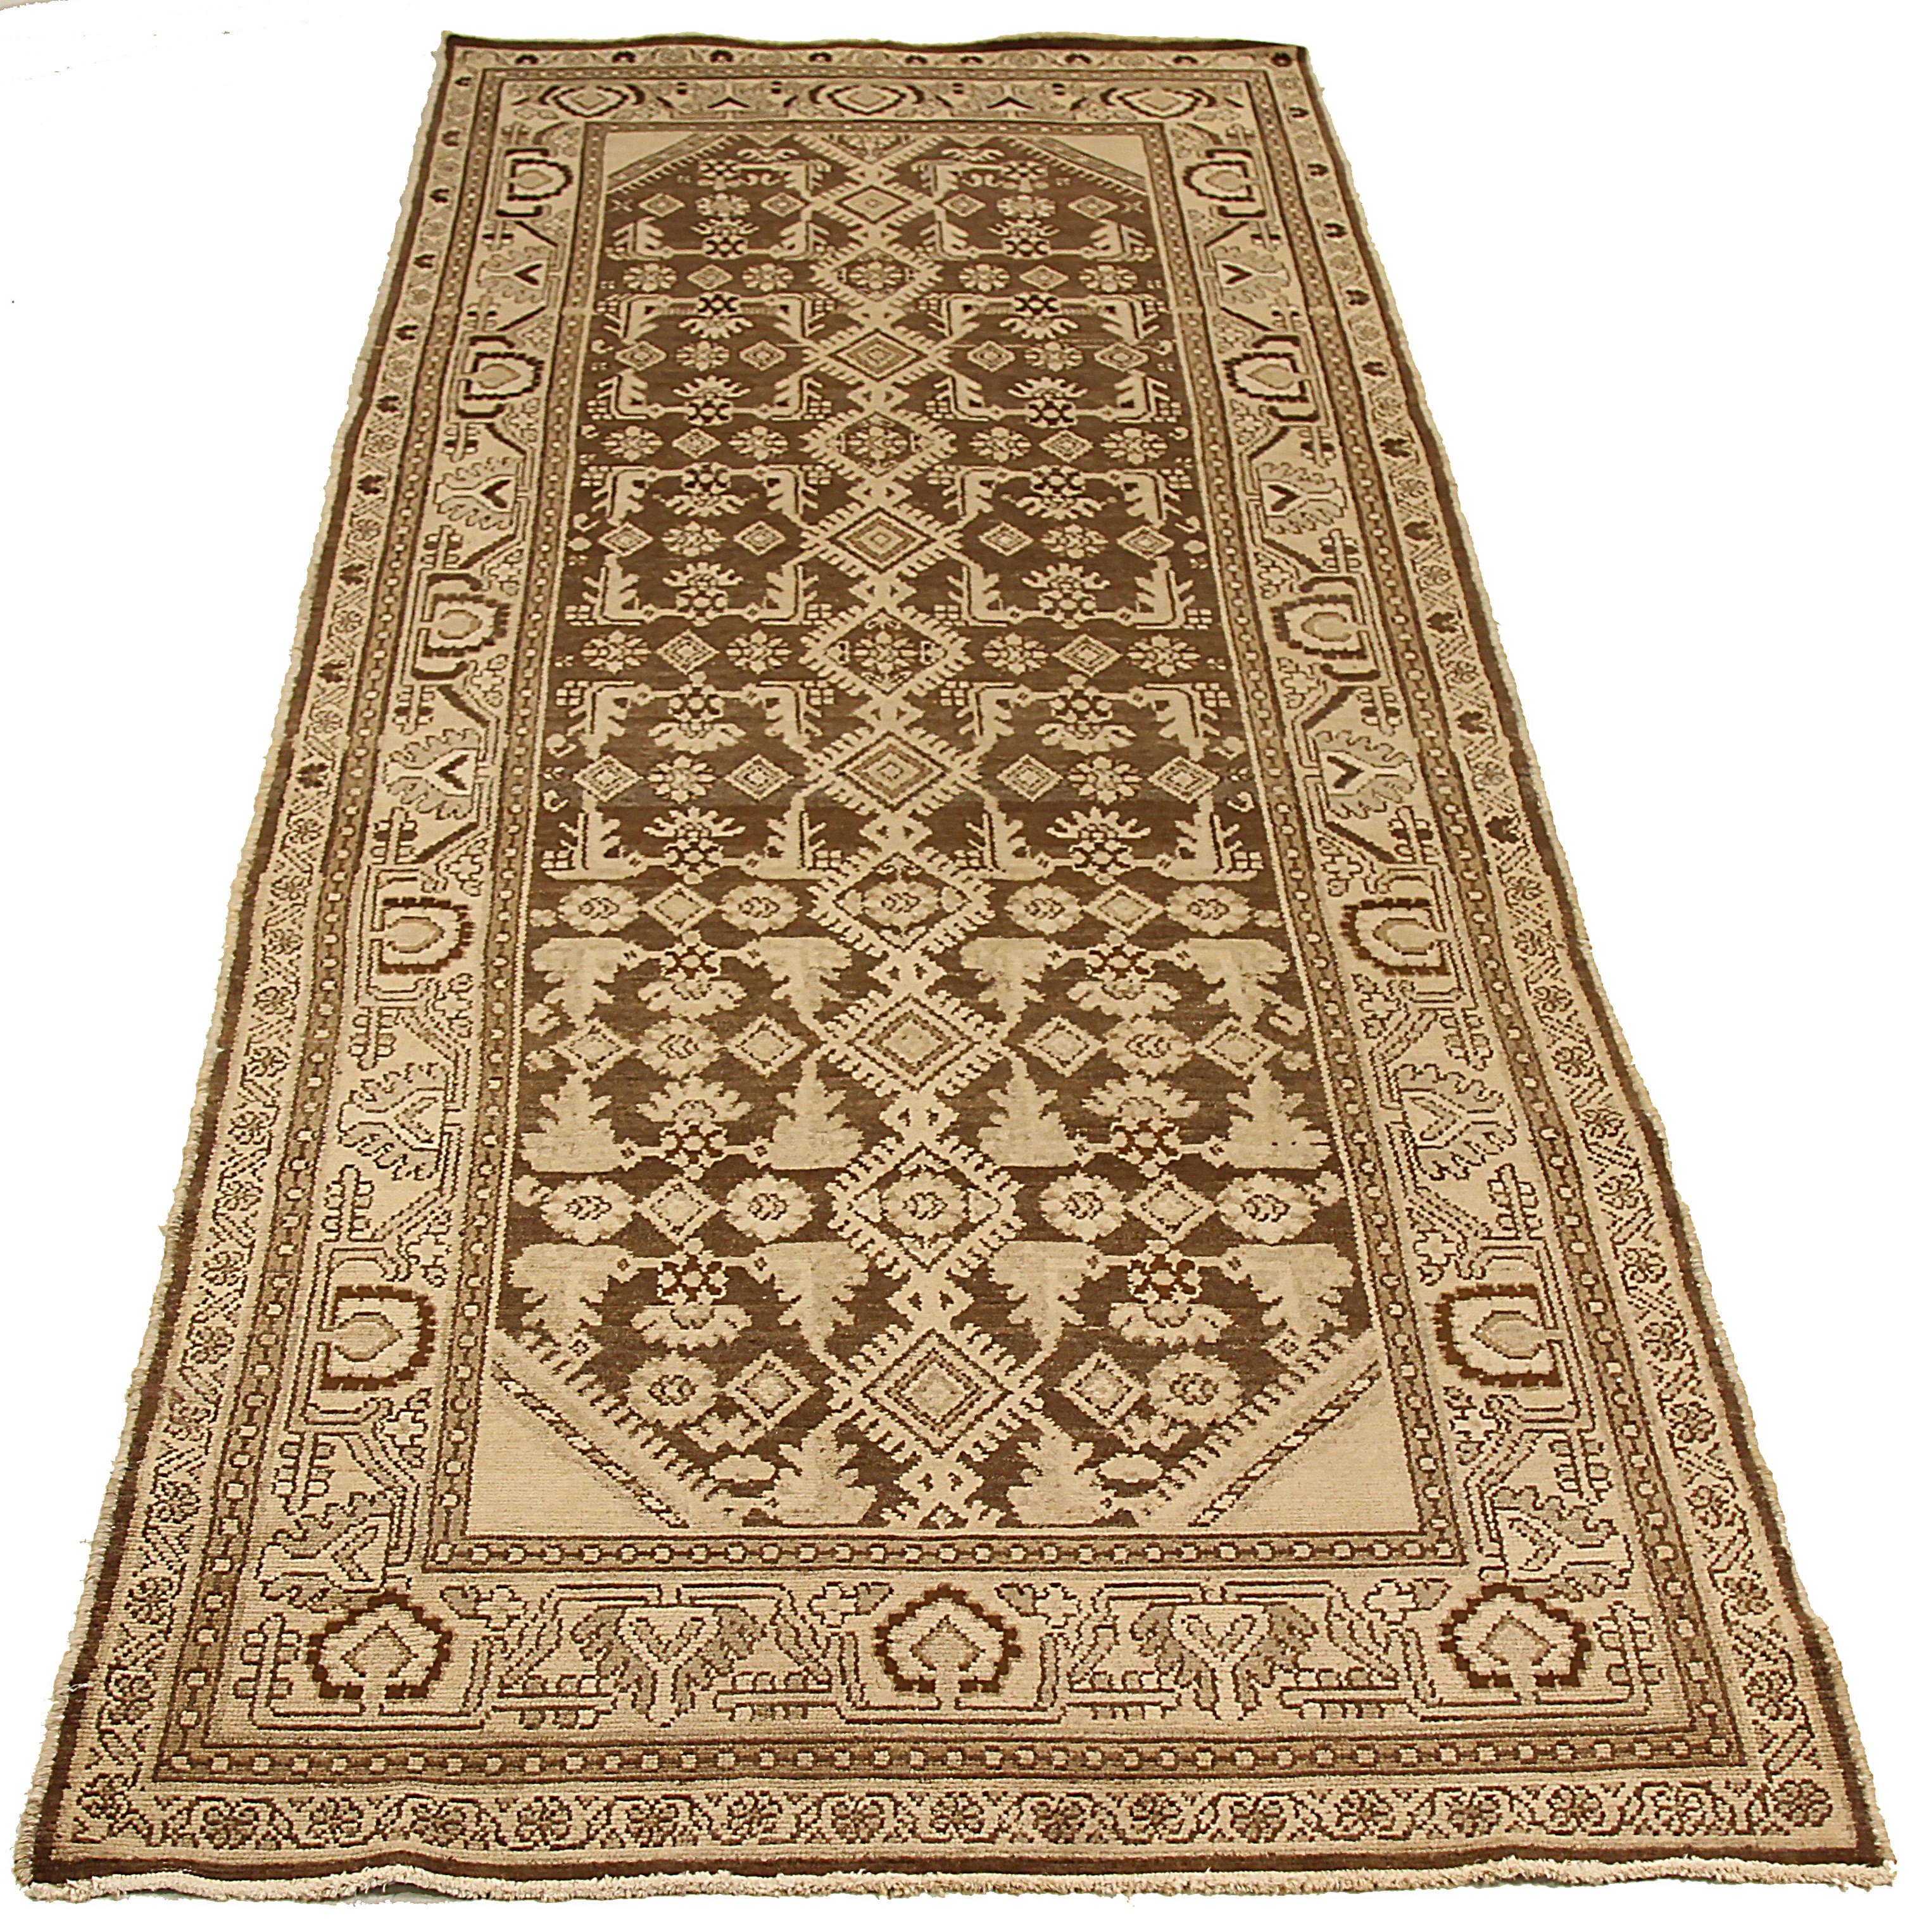 Antique Persian area rug handwoven from the finest sheep’s wool. It’s colored with all-natural vegetable dyes that are safe for humans and pets. It’s a traditional Malayer design featuring tribal design on a brown field. It’s a lovely piece to